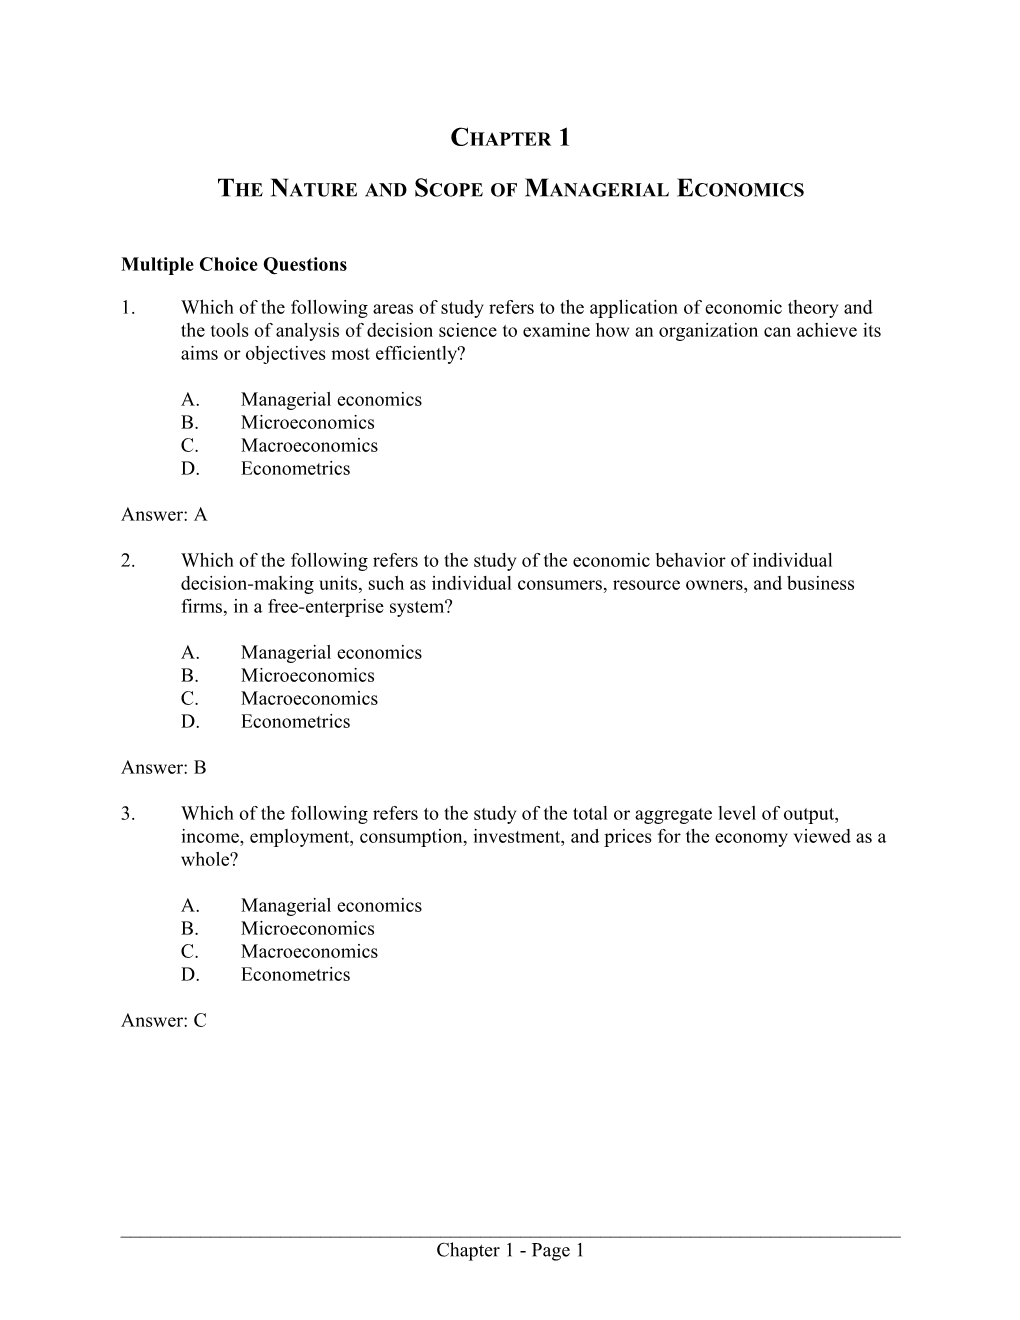 The Nature and Scope of Managerial Economics